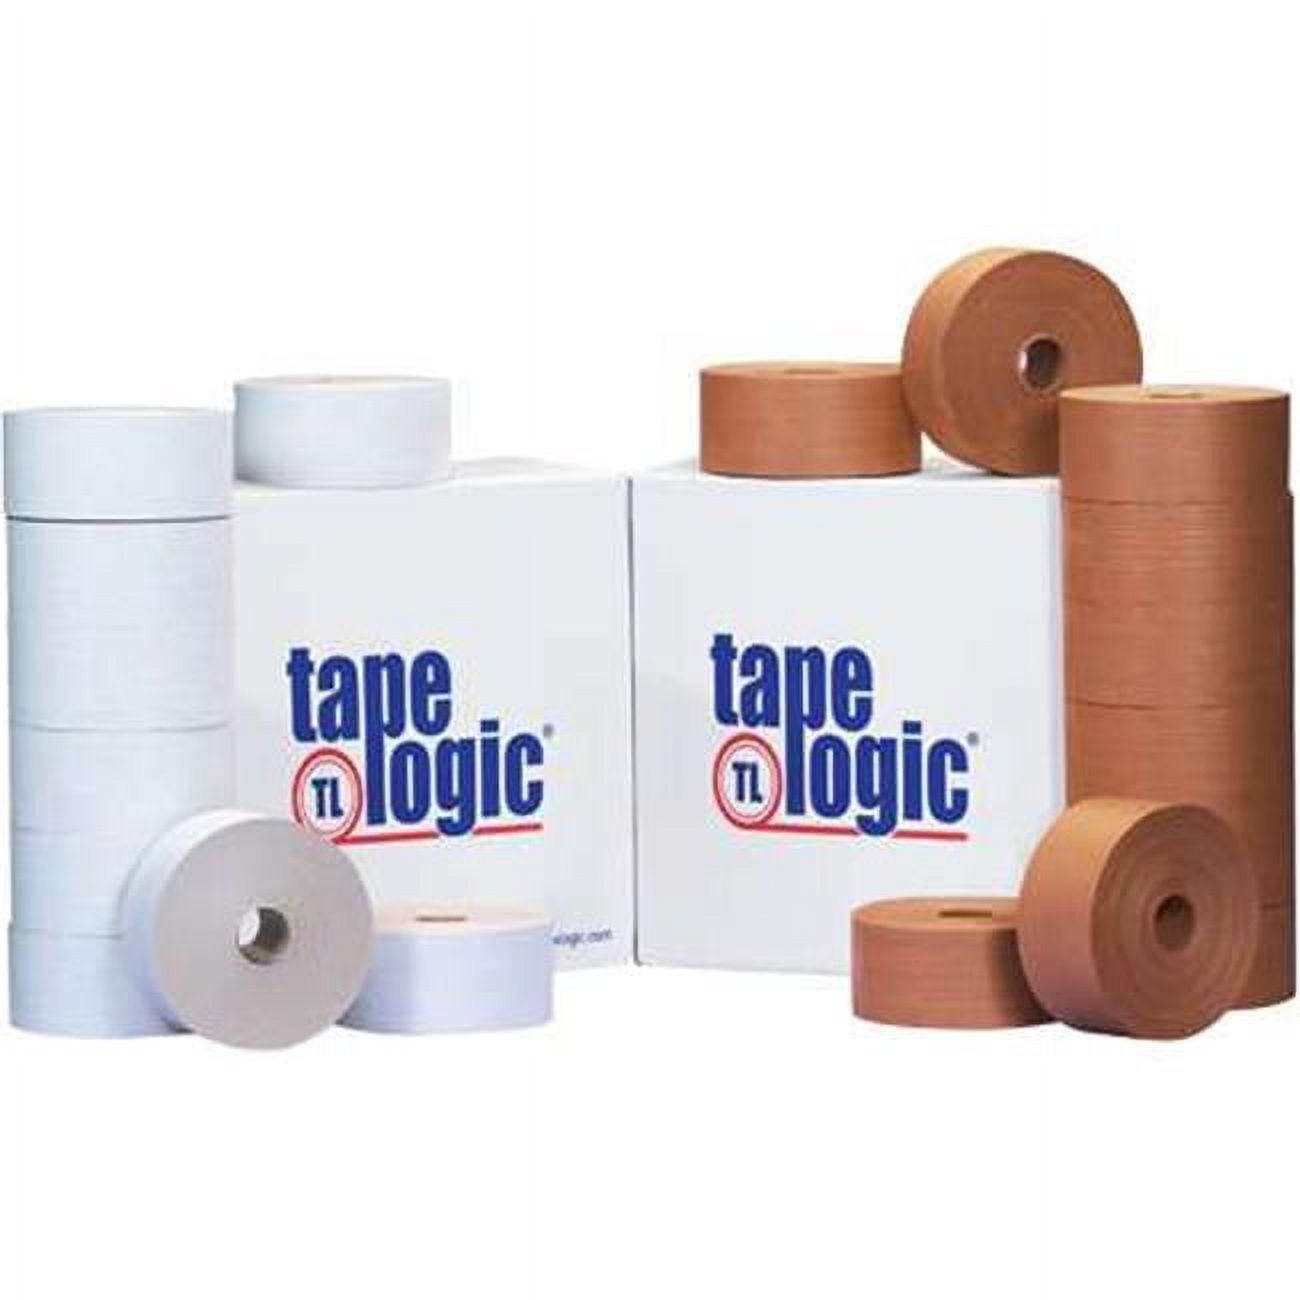 Tape Logic T9067200w 72 Mm X 375 Ft. White No.7200 Reinforced Water Activated Tape, White - Case Of 8